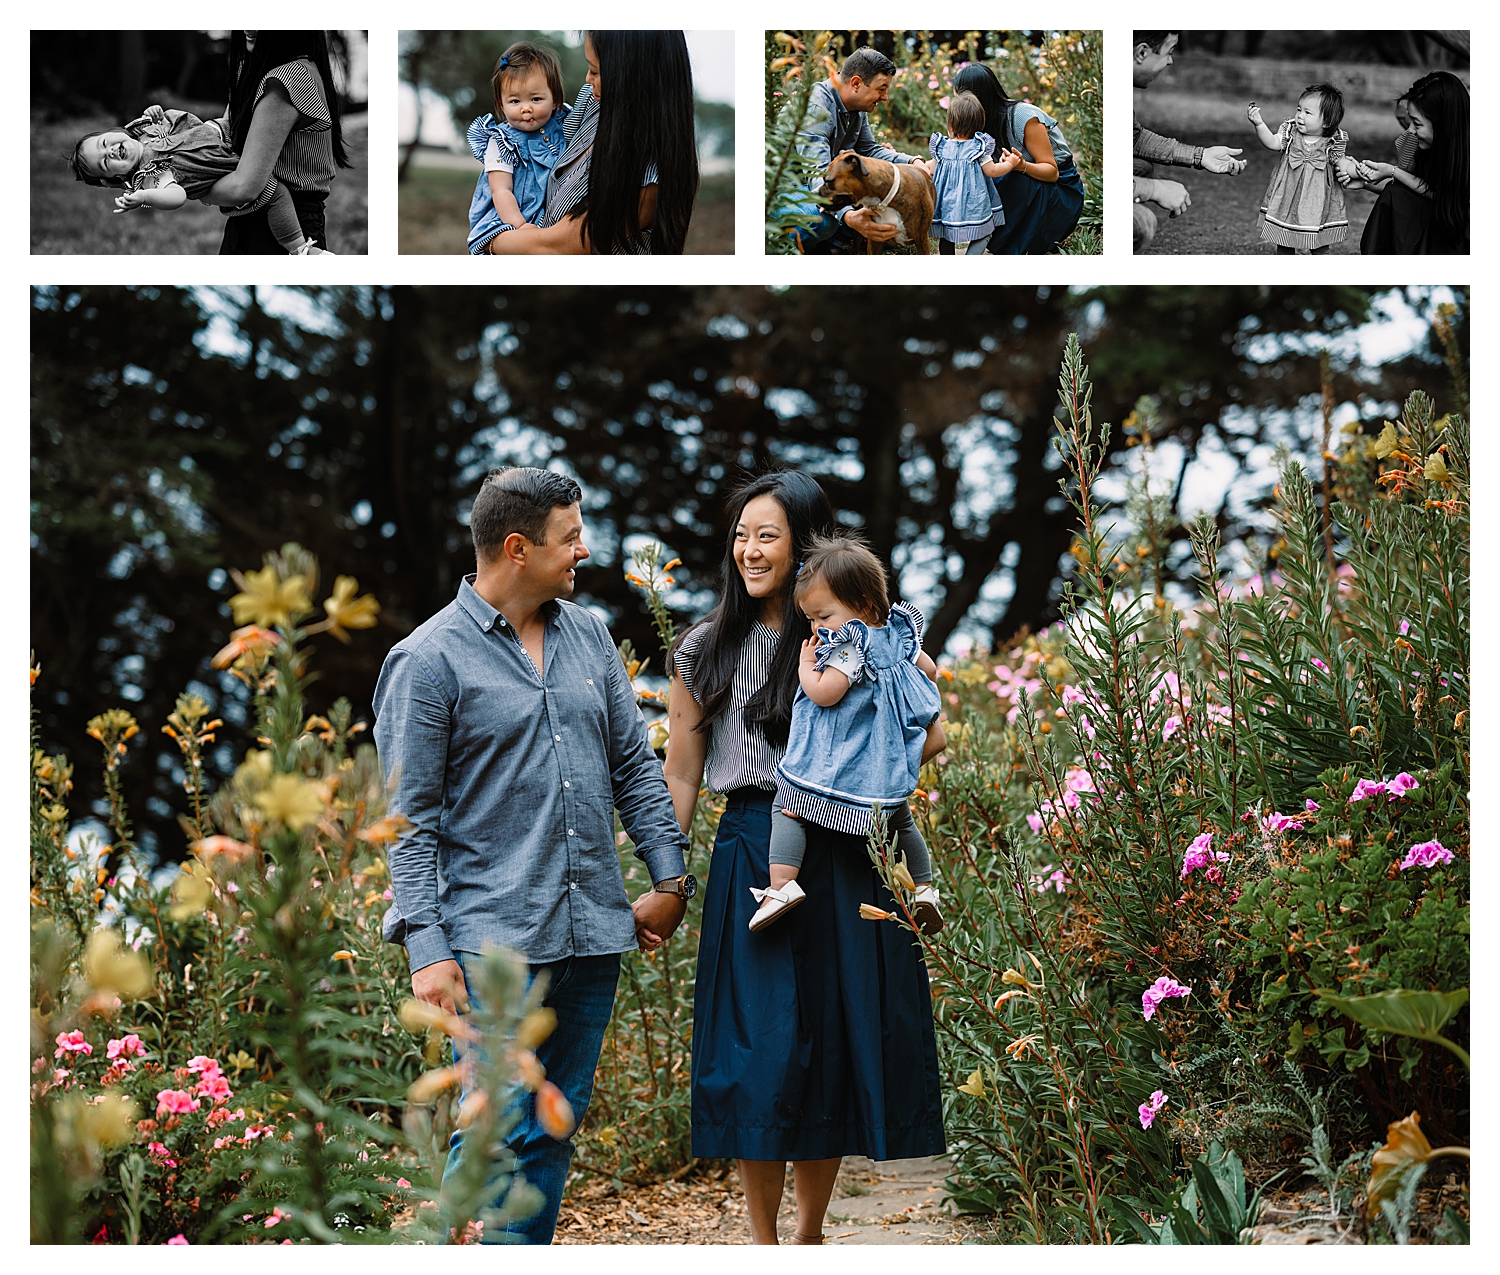 Outdoor family photography session